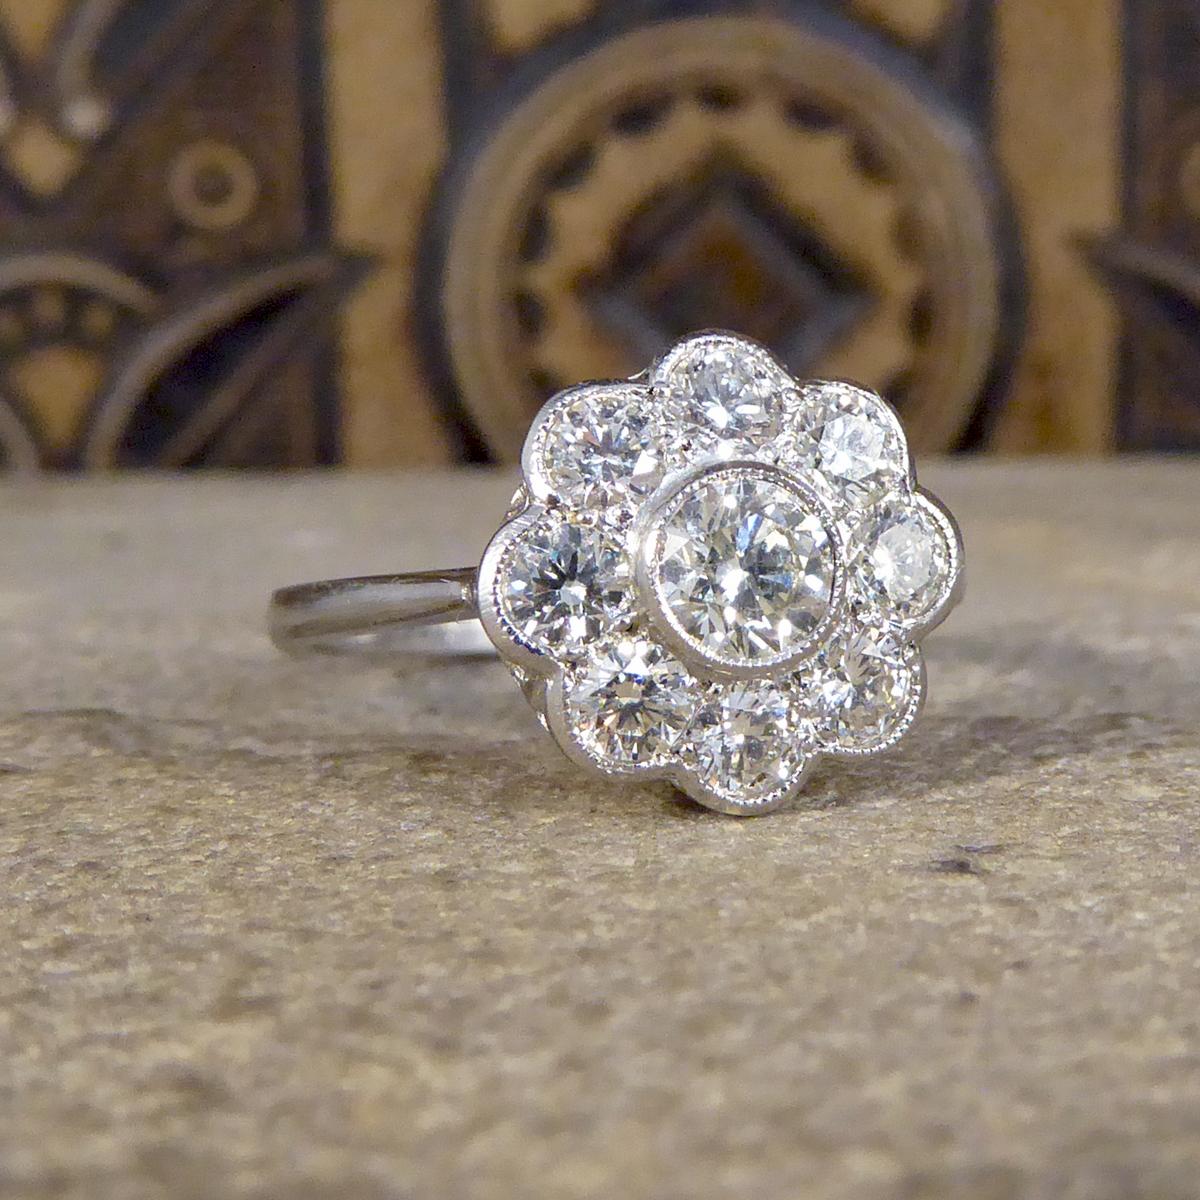 This fabulous Daisy cluster ring has a total of 1.05ct Brilliant cut Diamonds and sparkles with from all angles in its cluster setting. All set in Platinum with a milegrain edge with a beautiful gallery, leading to a plain band and is a true